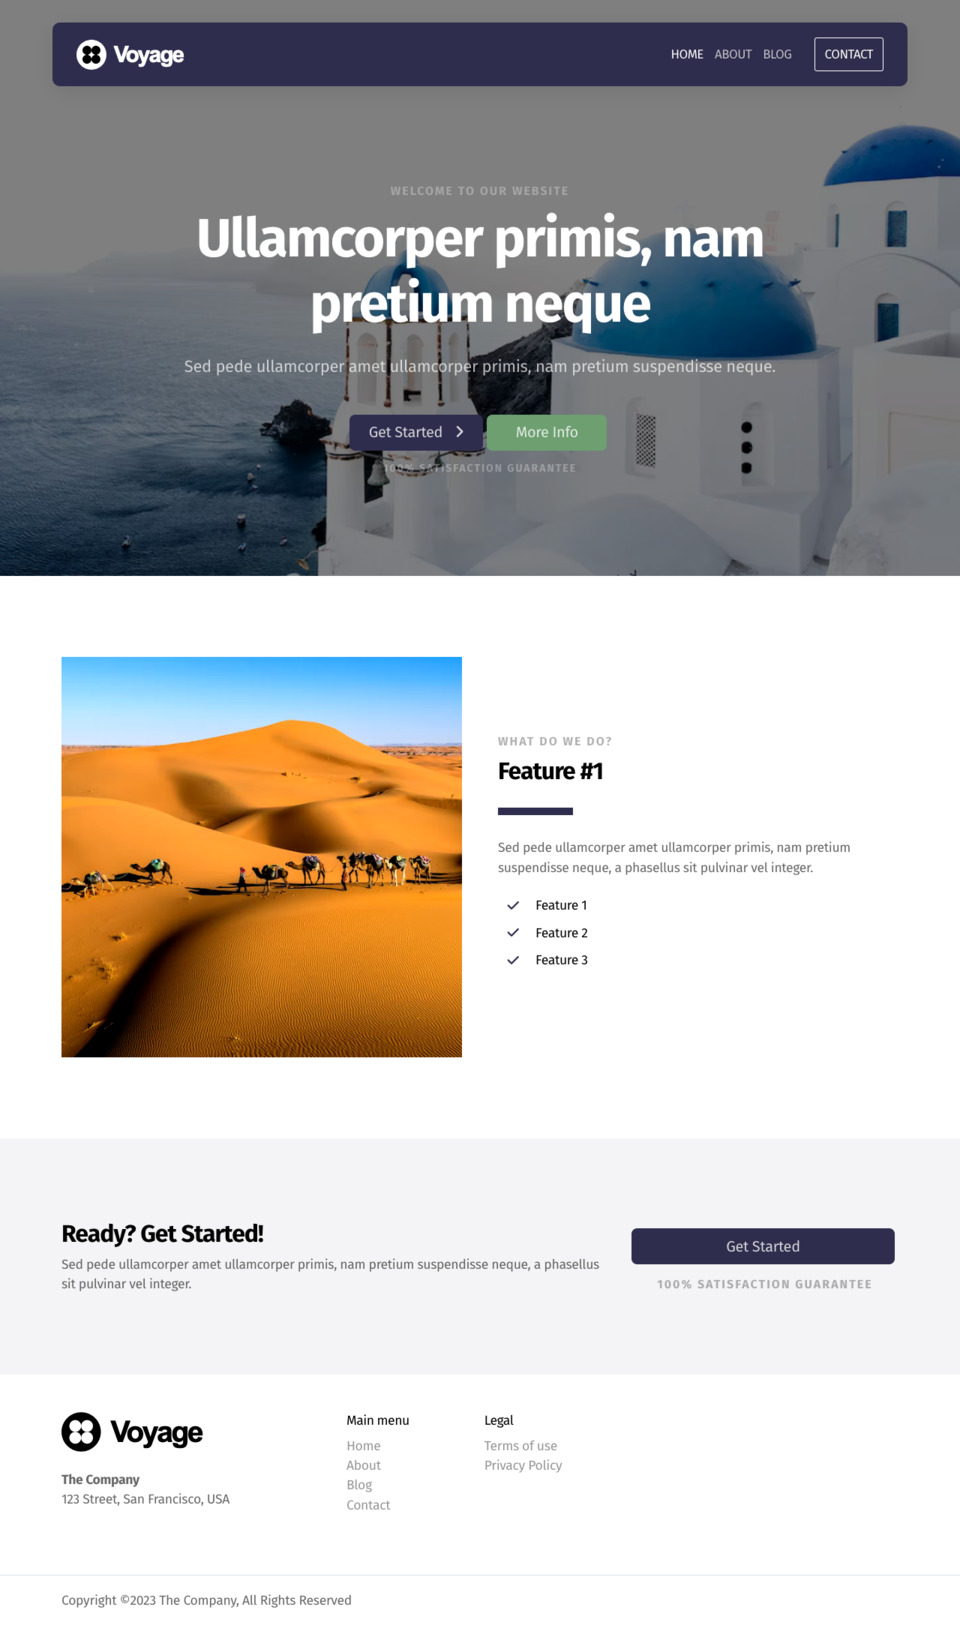 Voyage Website Template - Ideal for travel bloggers, vacation planners, tour guides, travel agencies, and anyone looking to create a visually appealing website related to travel and exploration.